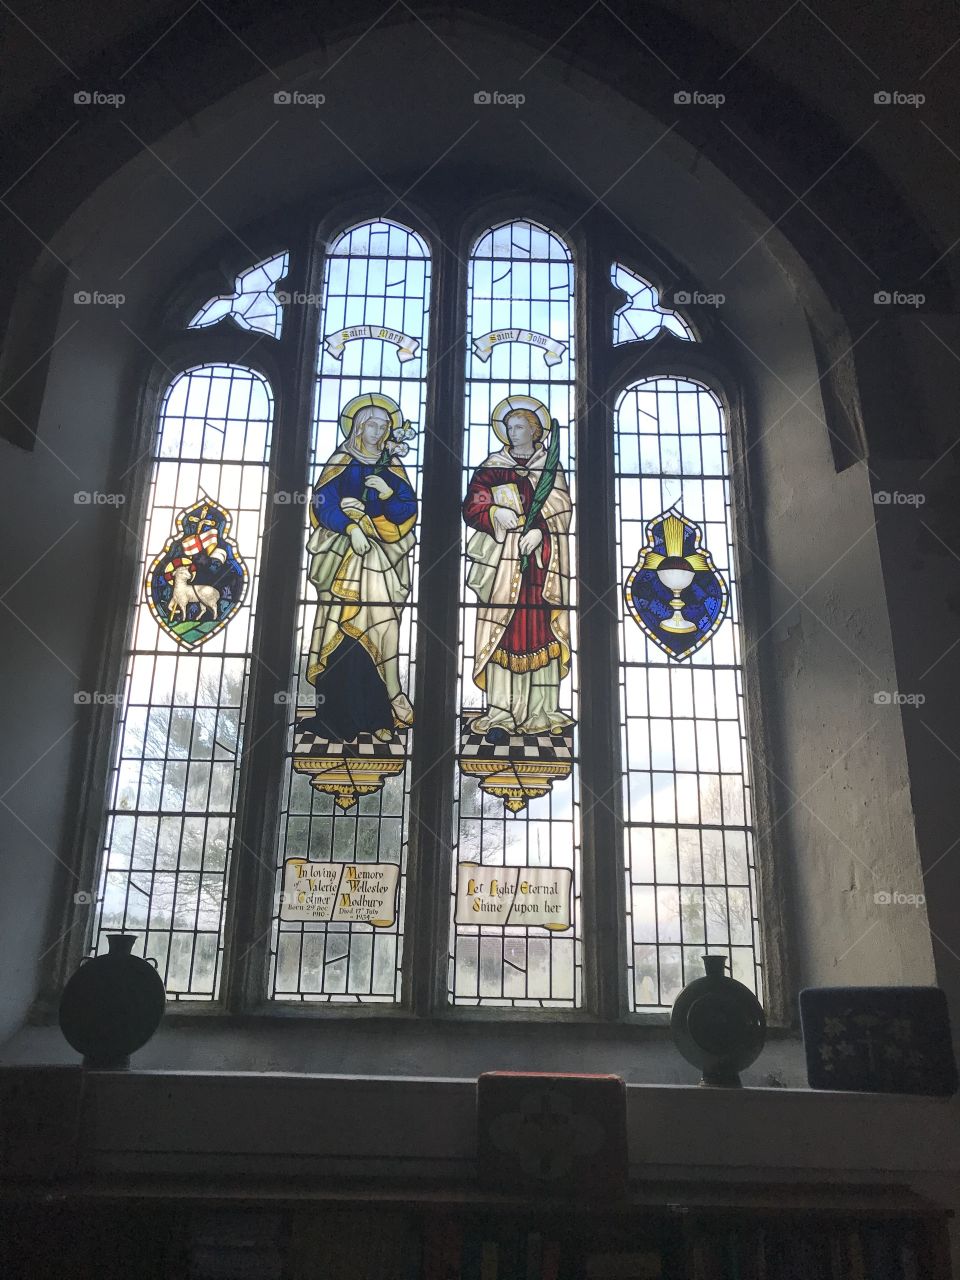 Shining examples of much loved stained glass windows, at St George Church in Modbury, Devon